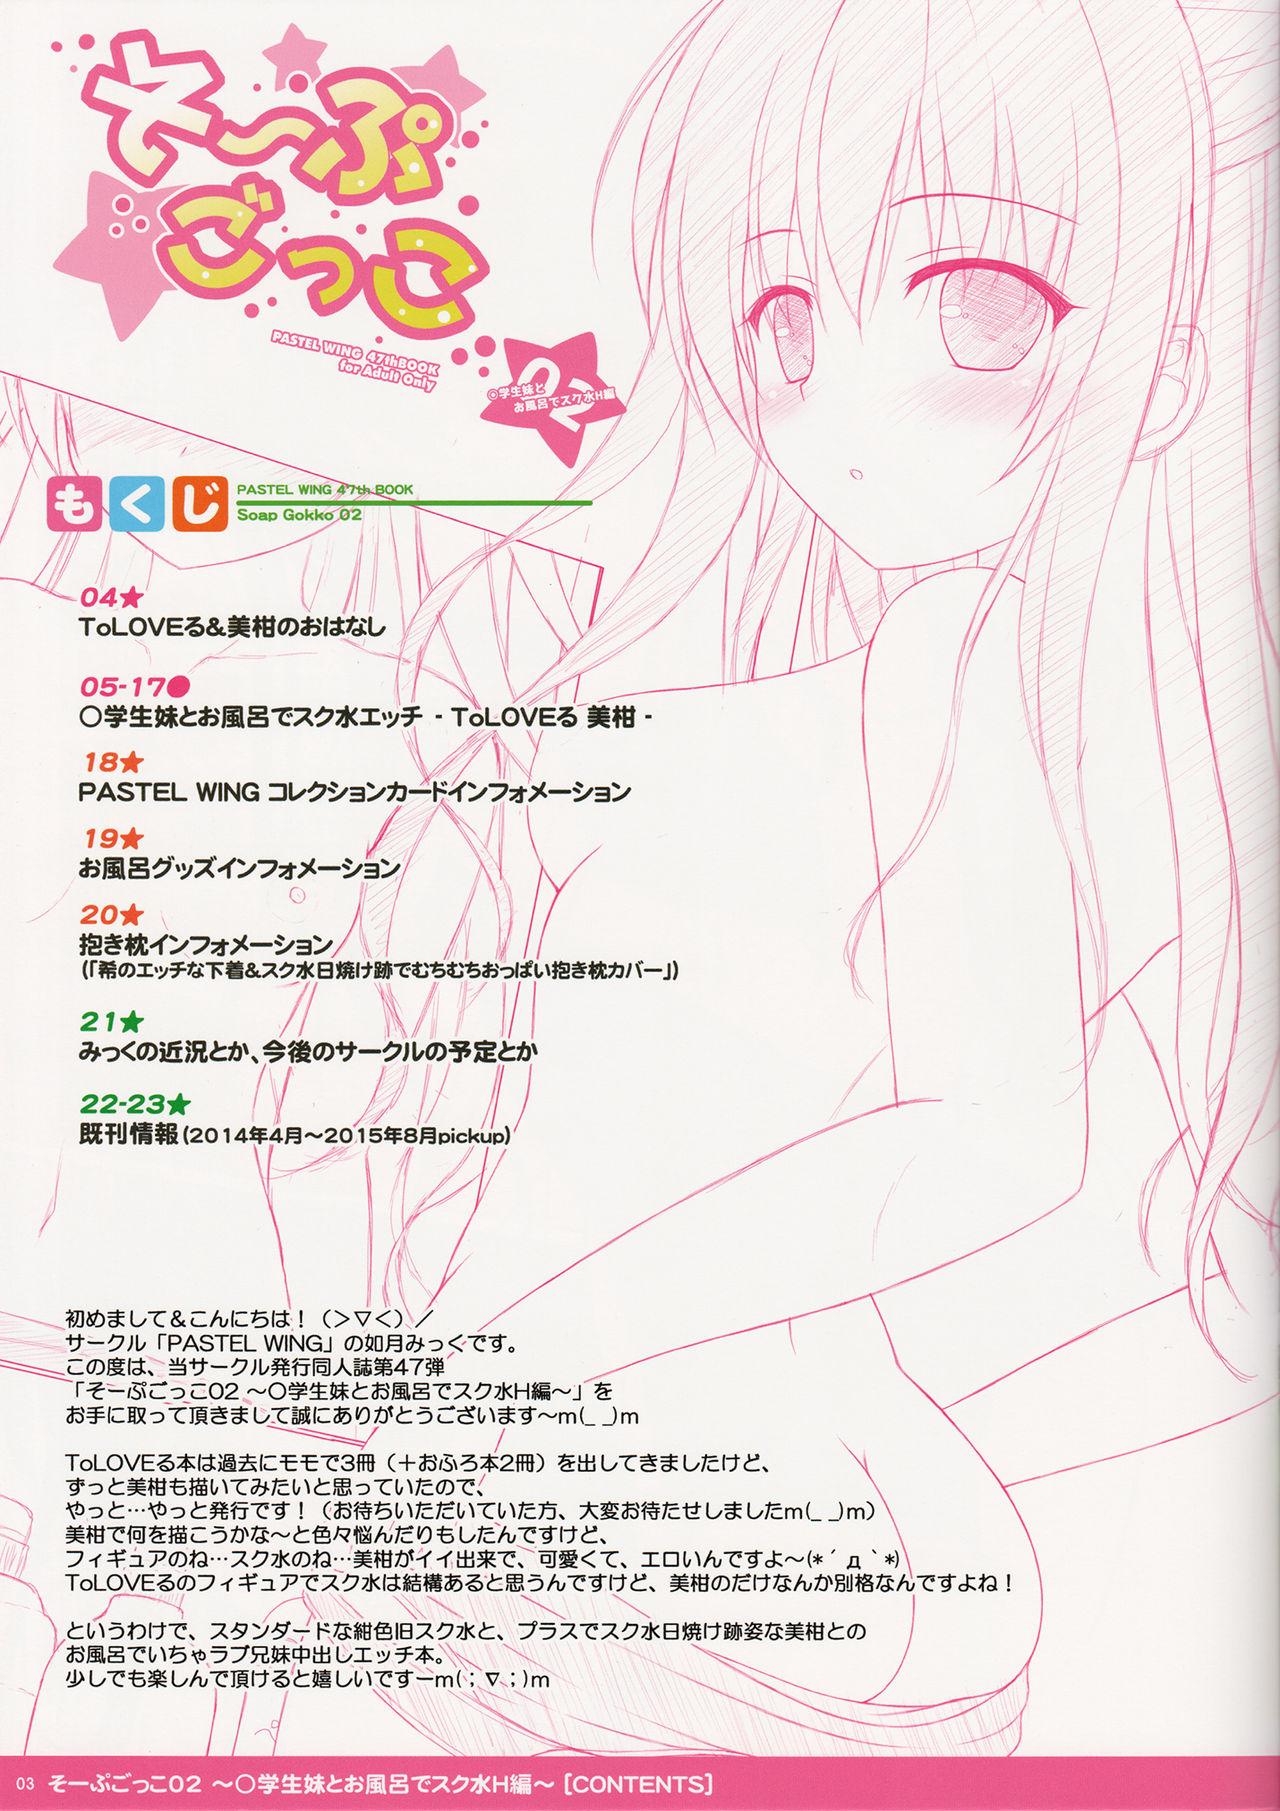 Bigcock Soap Gokko 02 - To love-ru Free Blowjobs - Page 3